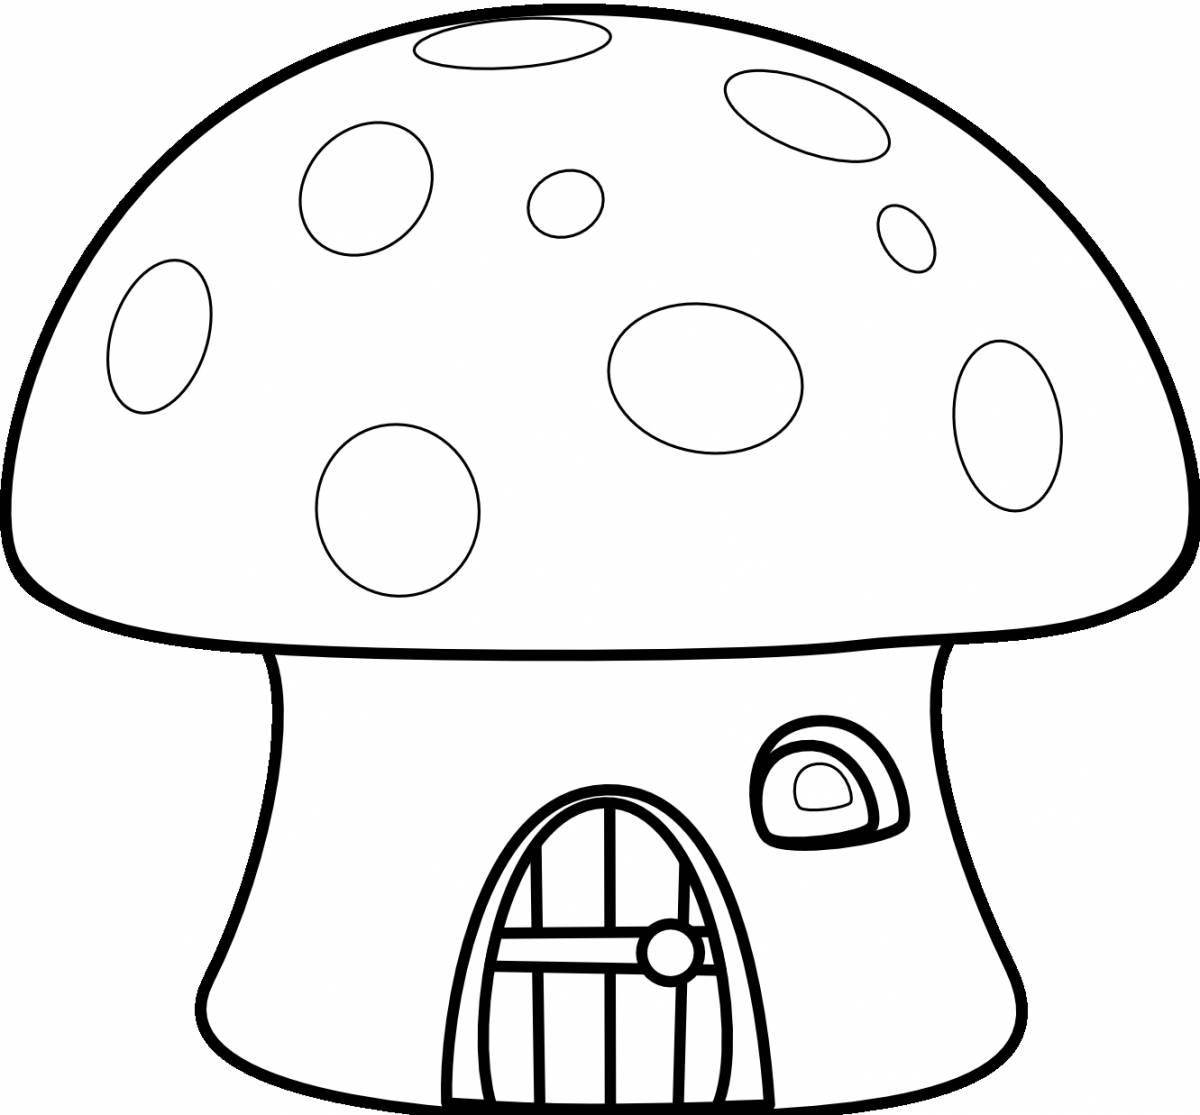 Outstanding mushroom coloring page for 3-4 year olds